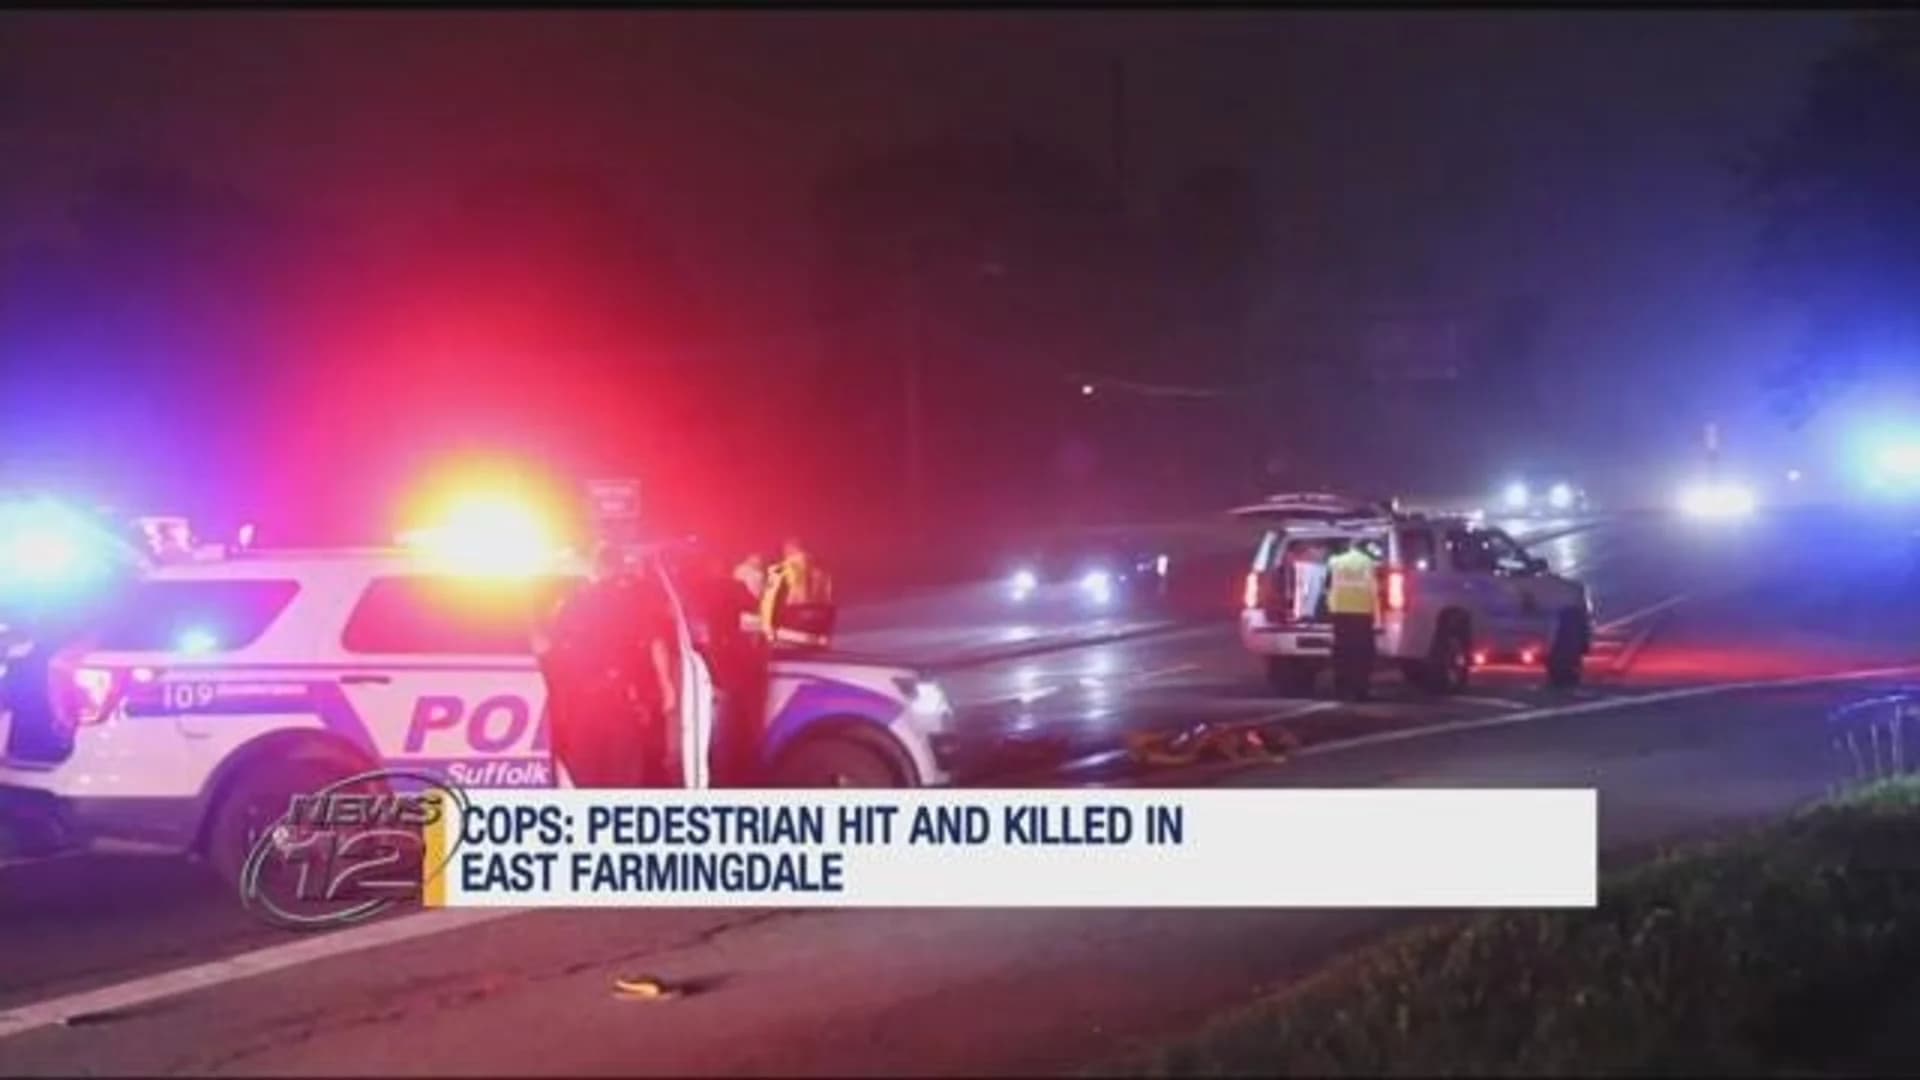 Pedestrian hit and killed in East Farmingdale